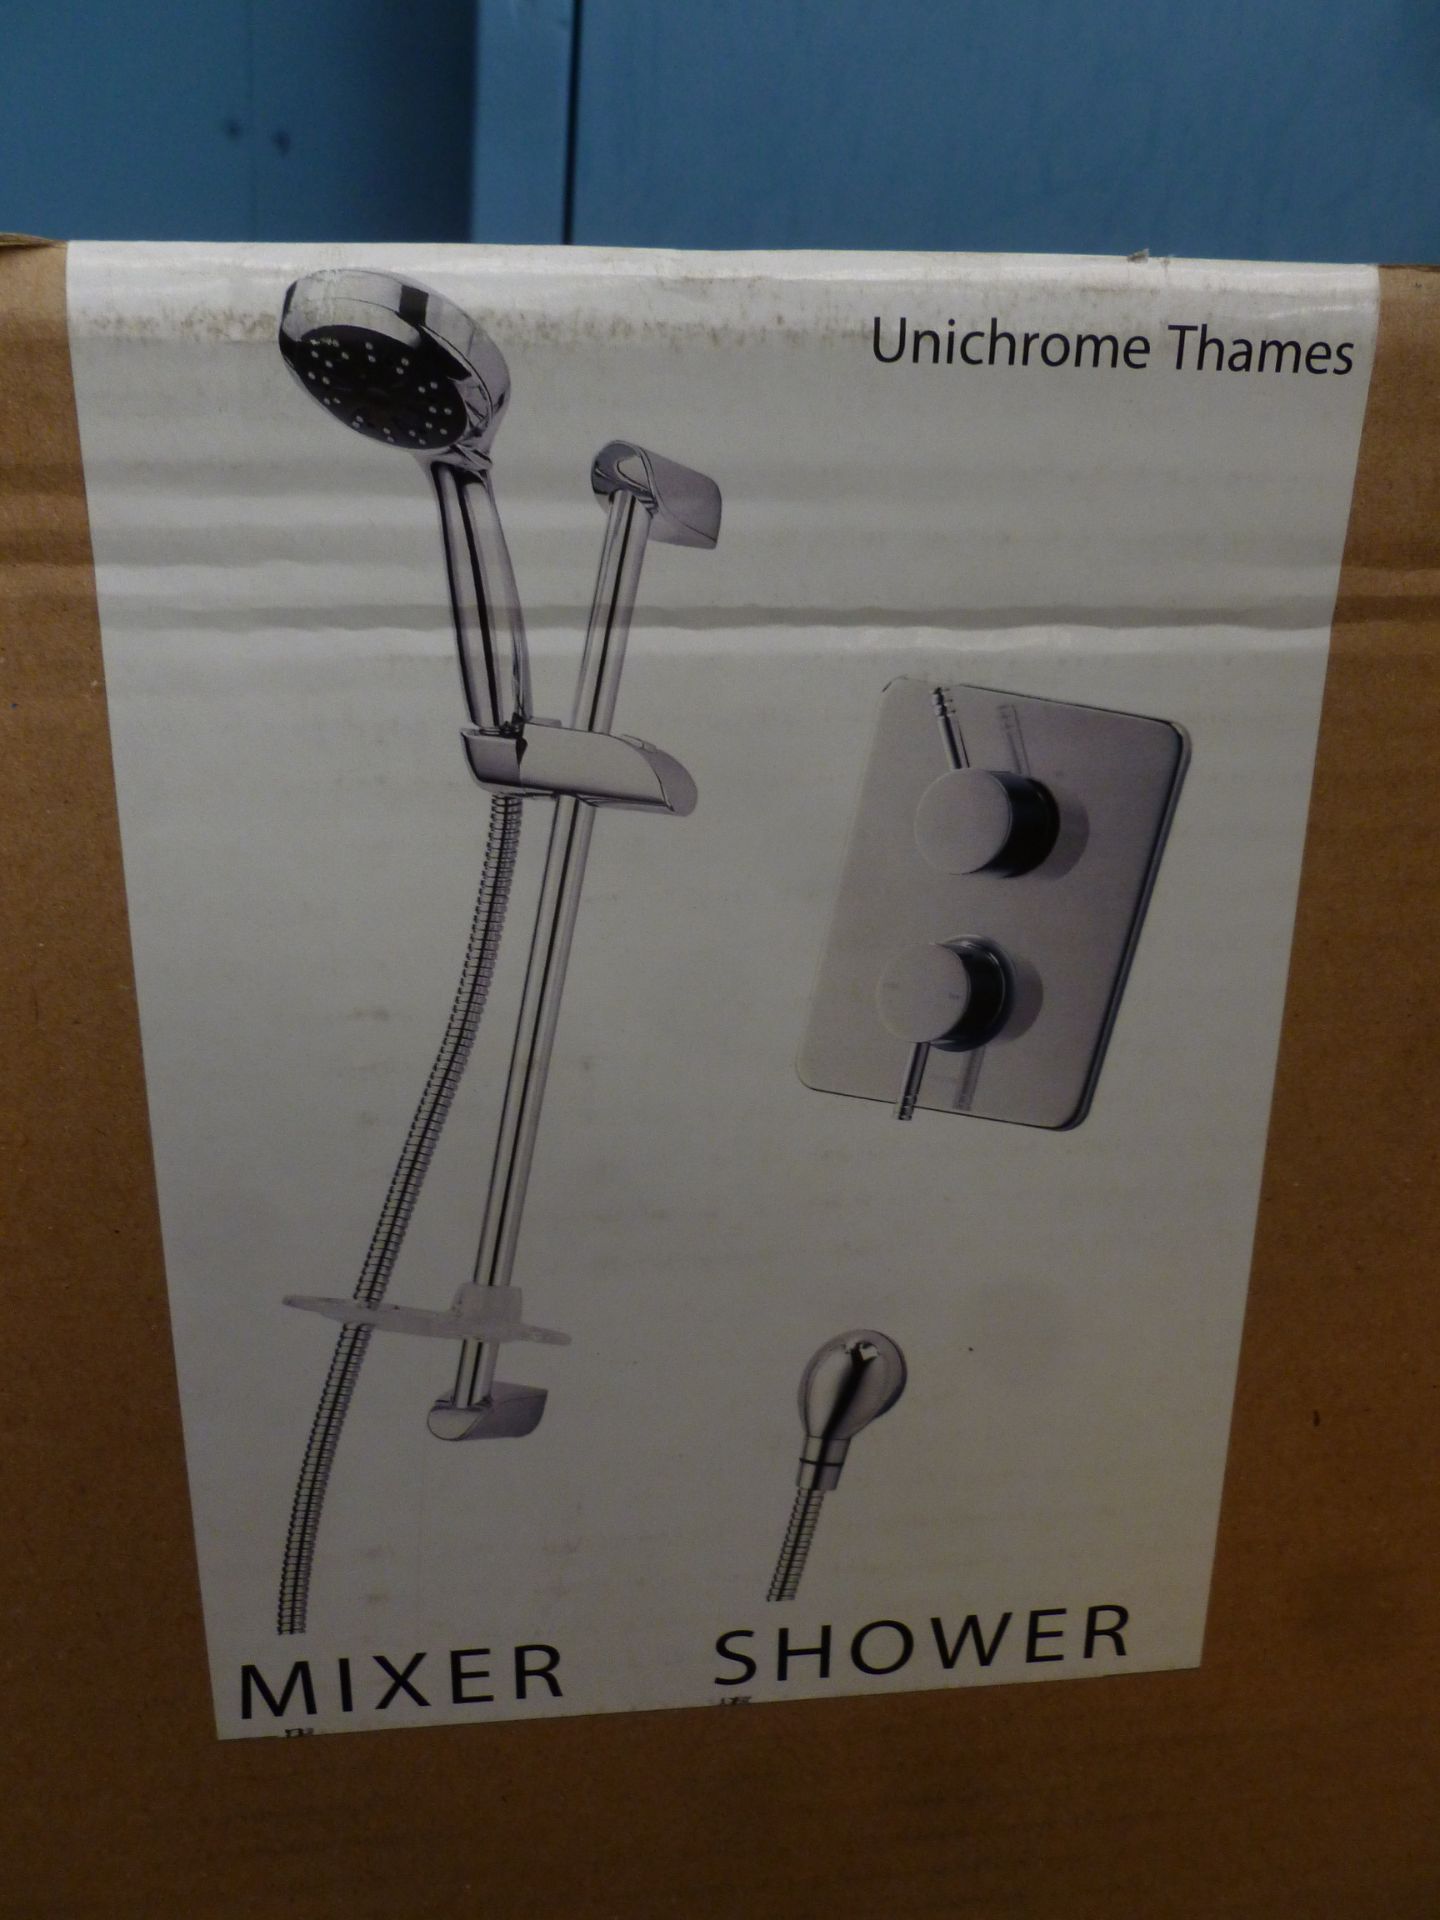 Triton Unichrome Thames Thermostatic Built in Dual Control Mixer Shower with Riser Rail. New, sealed